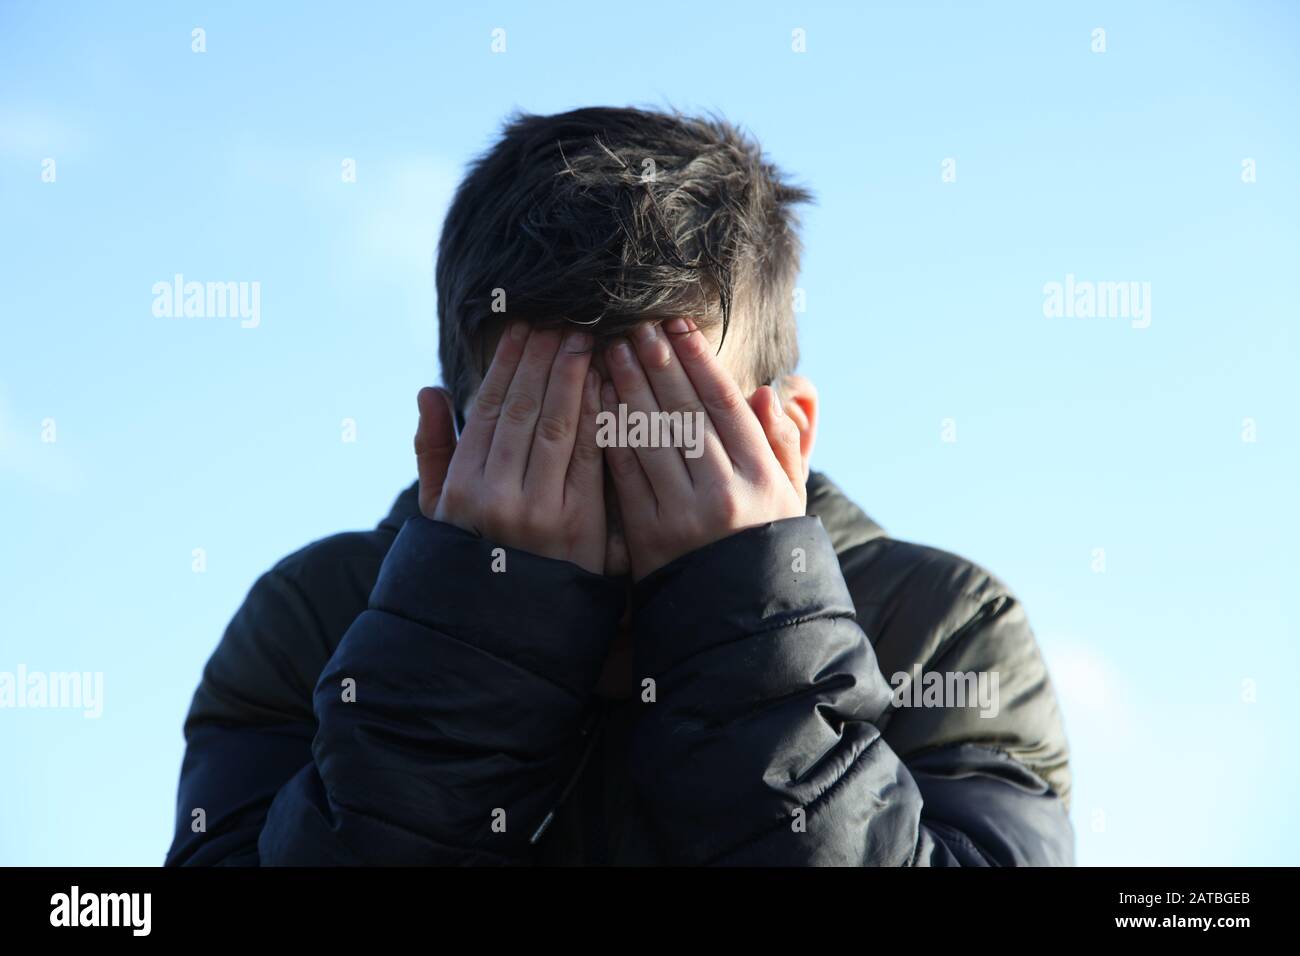 A young boy of 12 covers his muddy face with his hands, facing camera Stock Photo